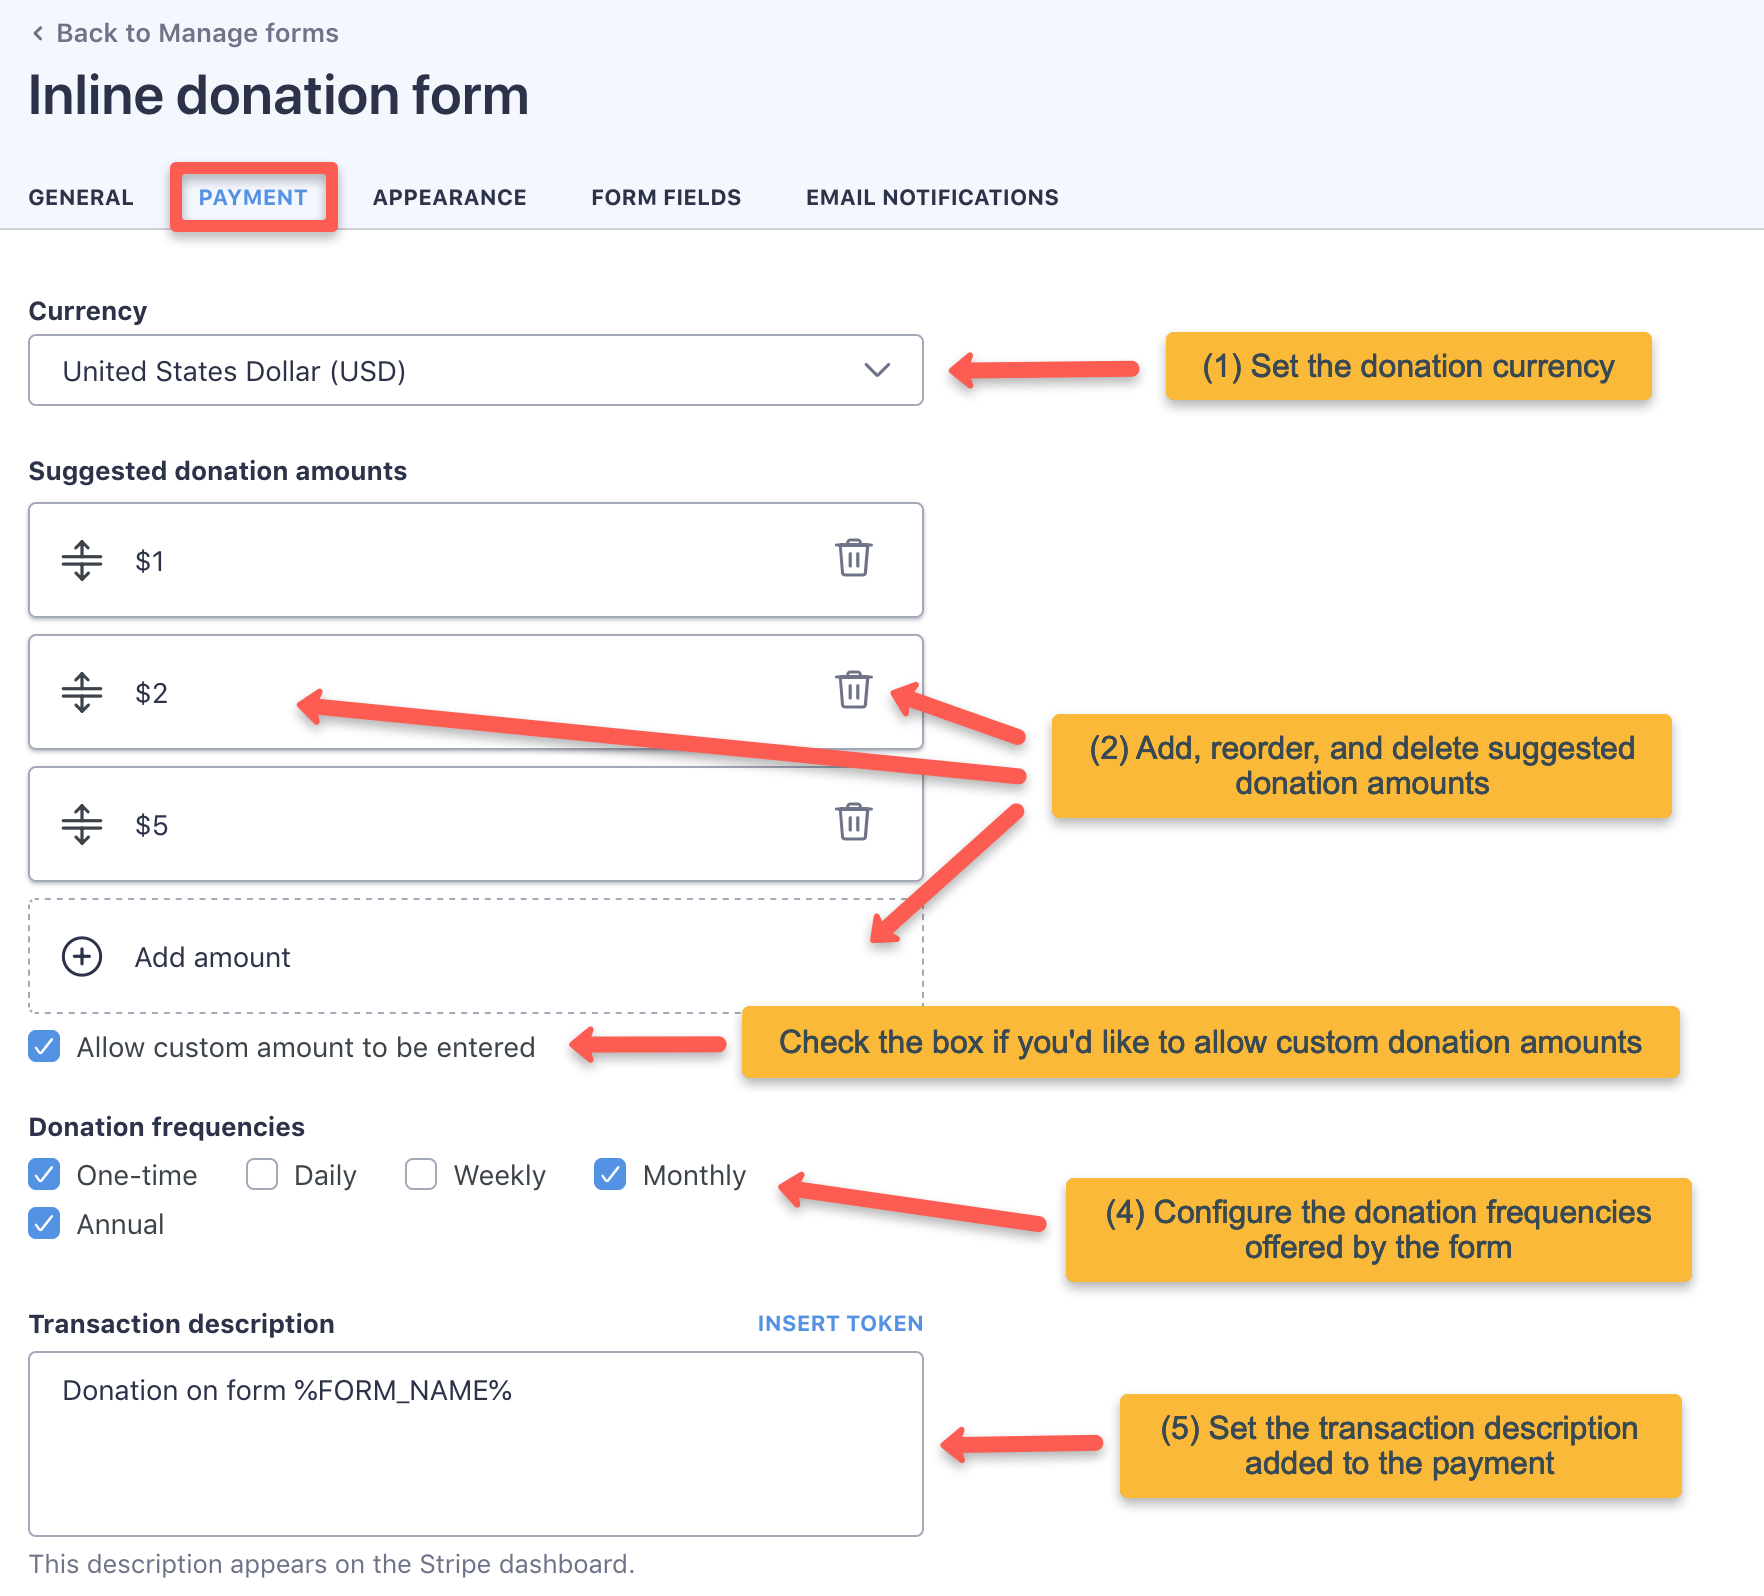 You can configure the donation settings on the 'Payment' tab of the form